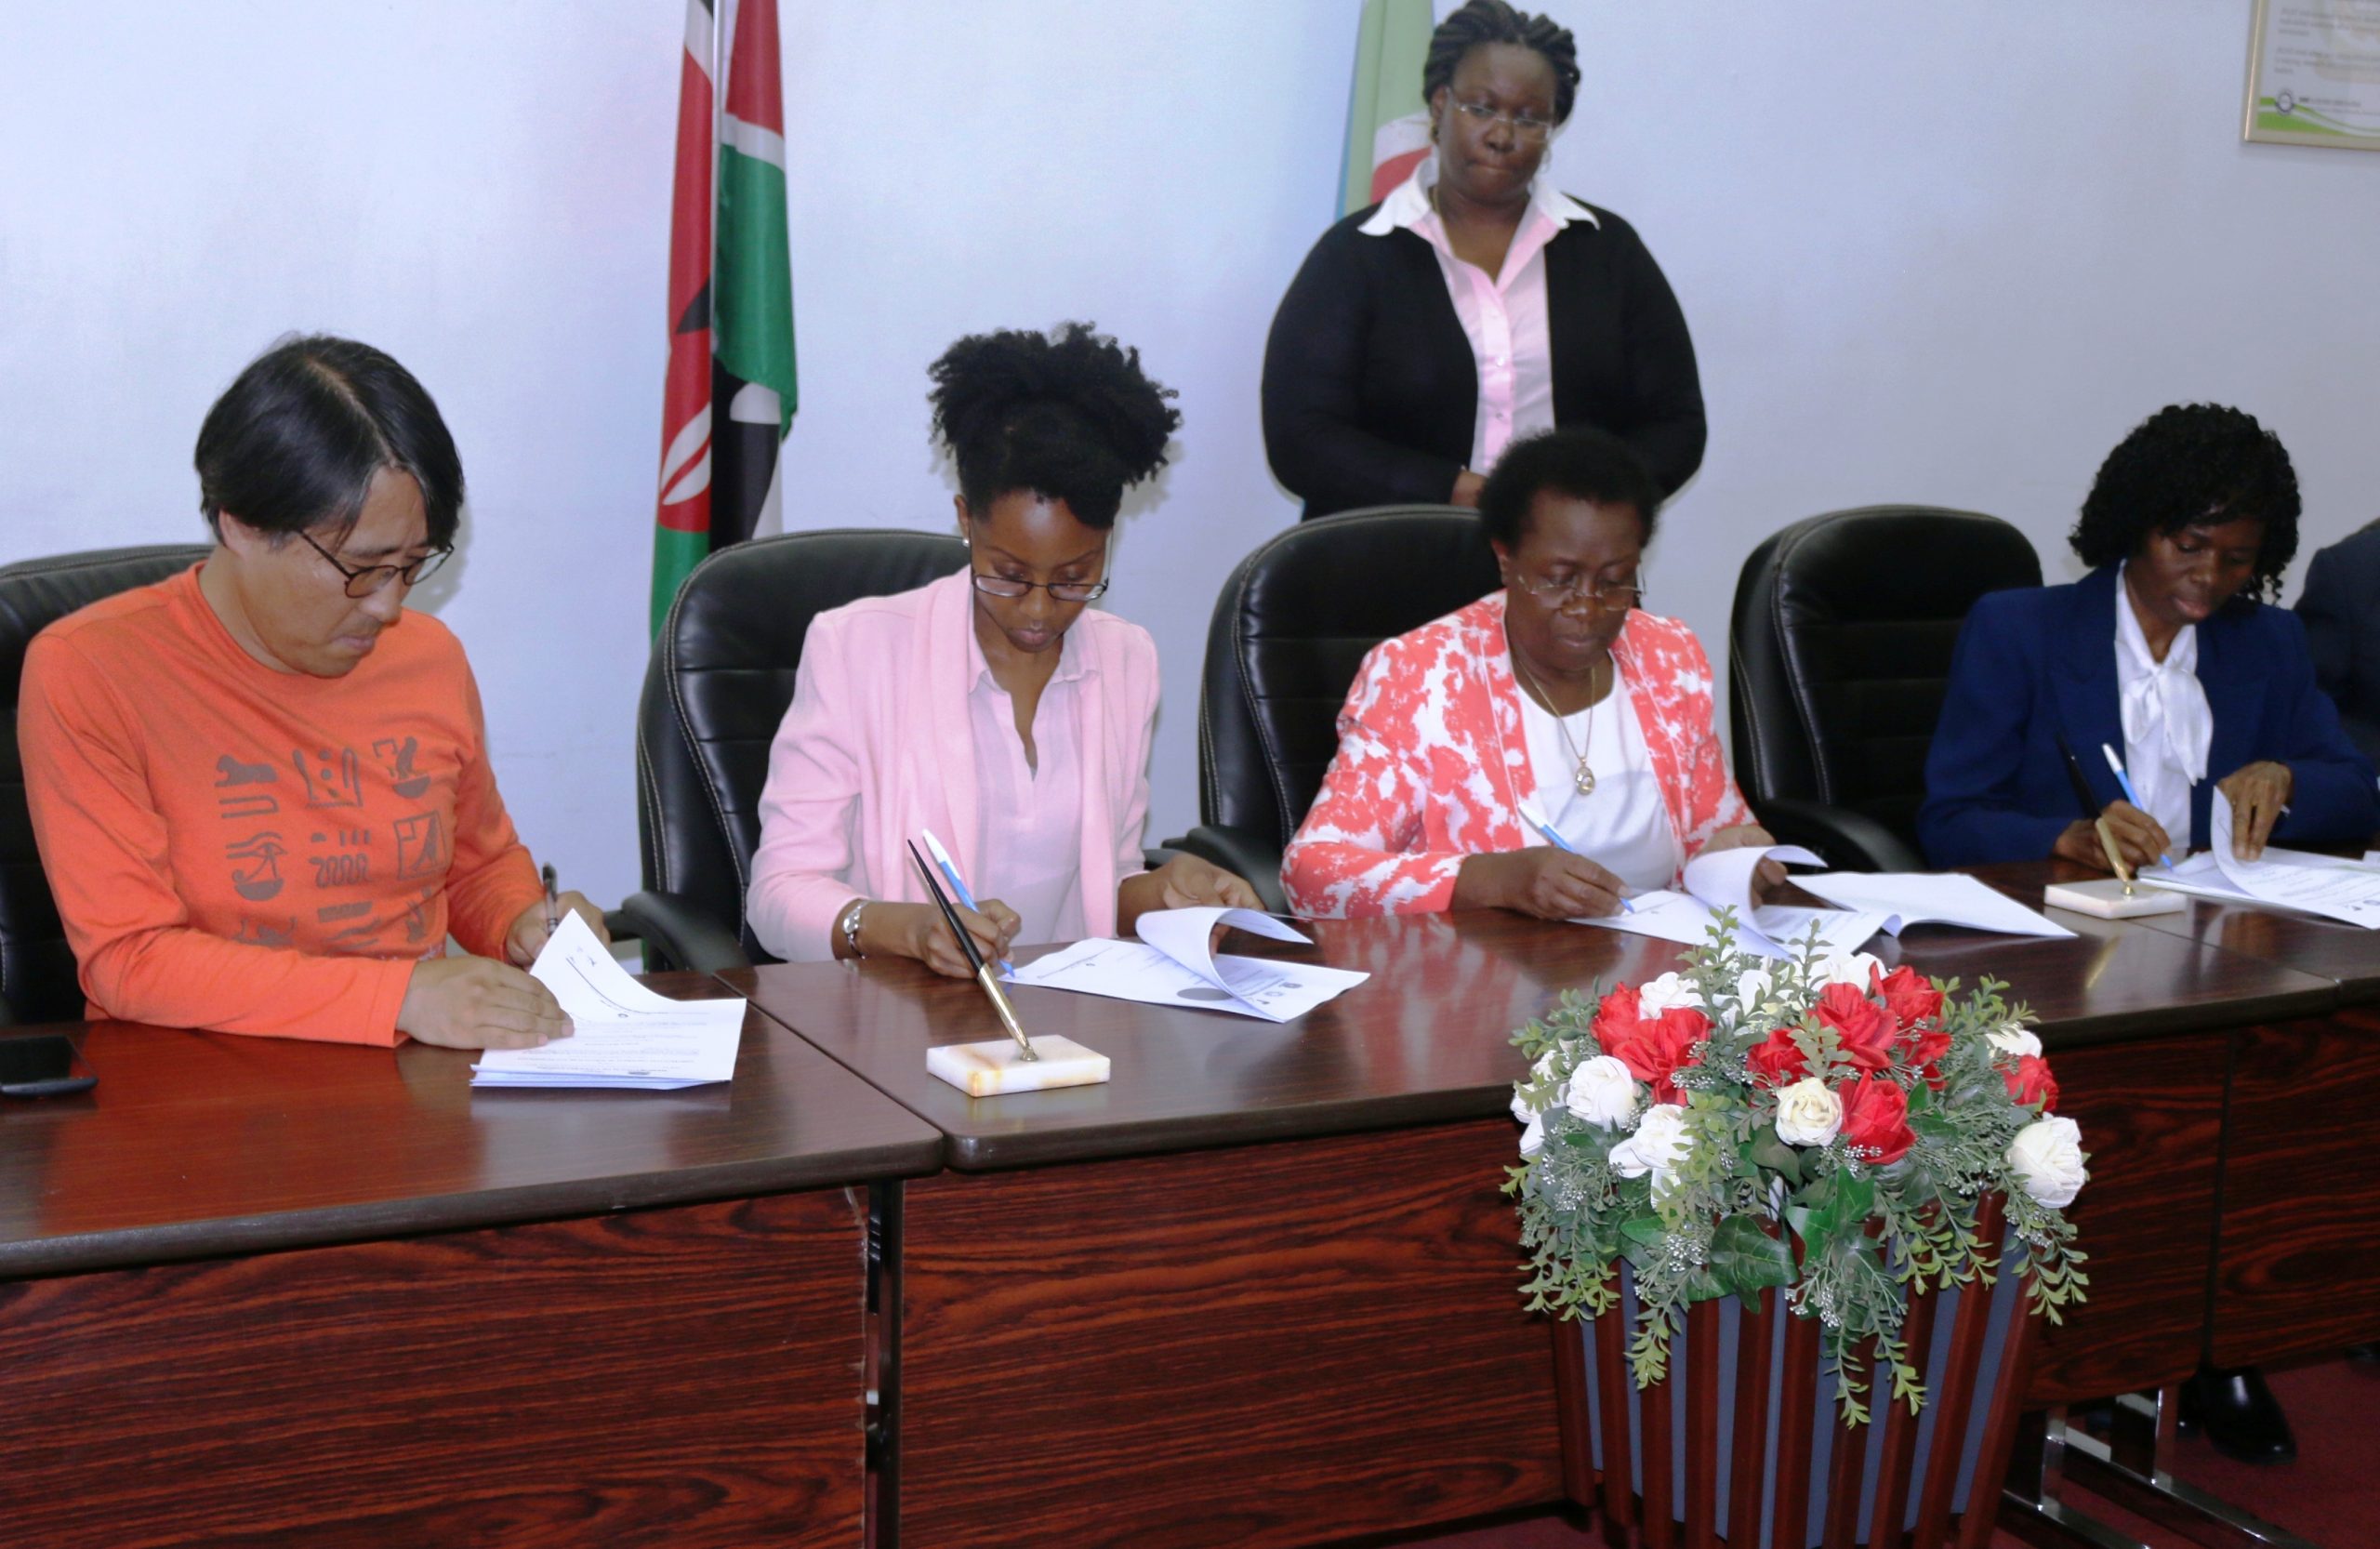 JKUAT enters partnership to create sustainable startups